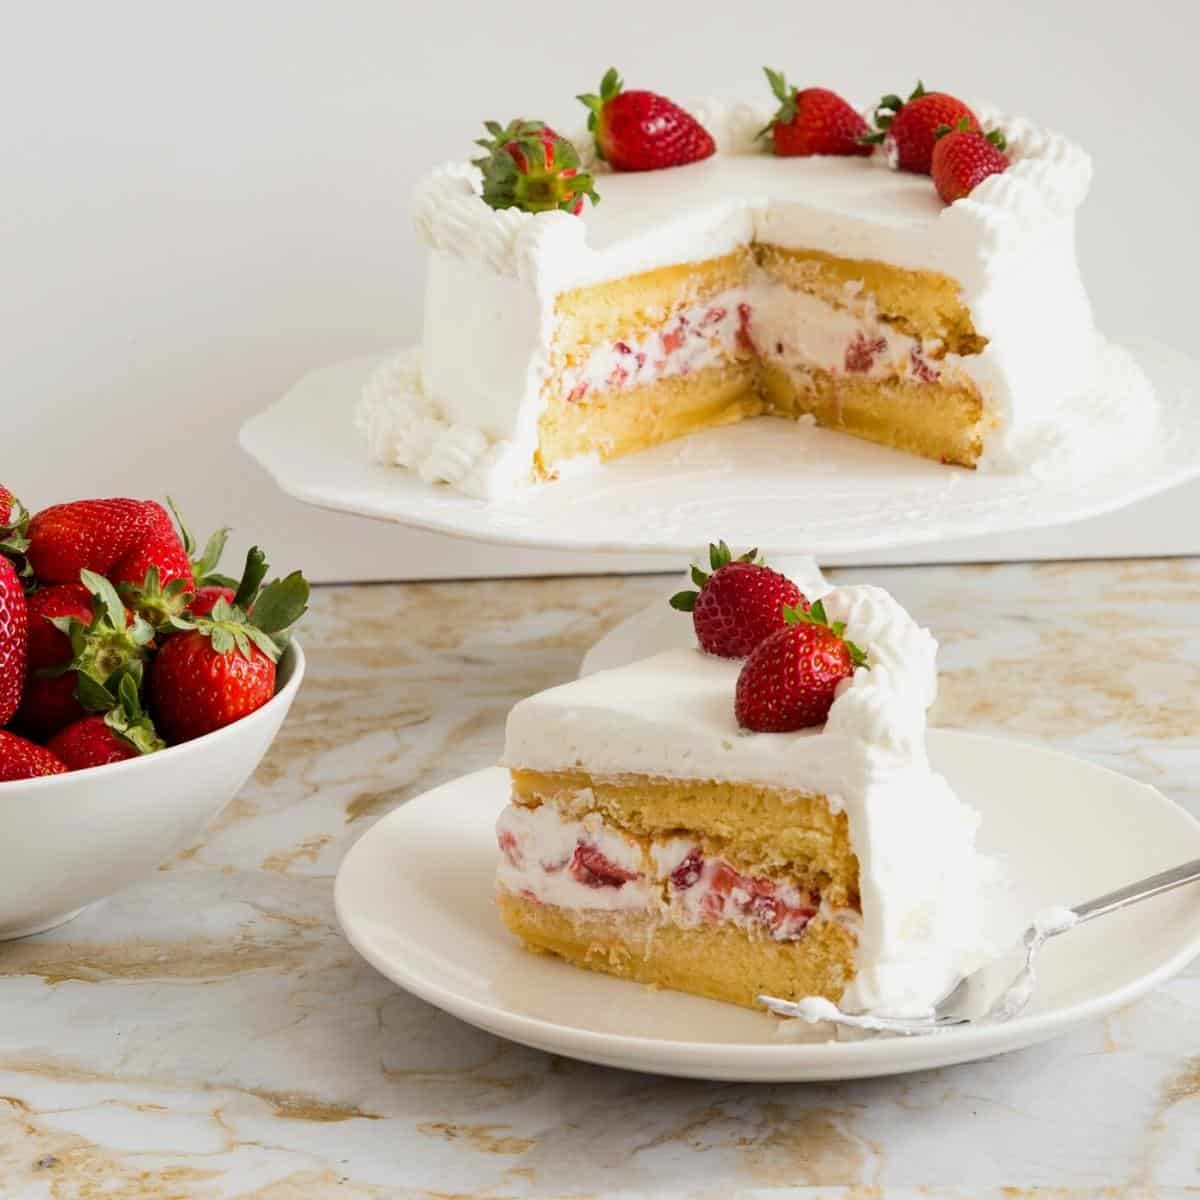 A sliced genoise cake with whipped cream.